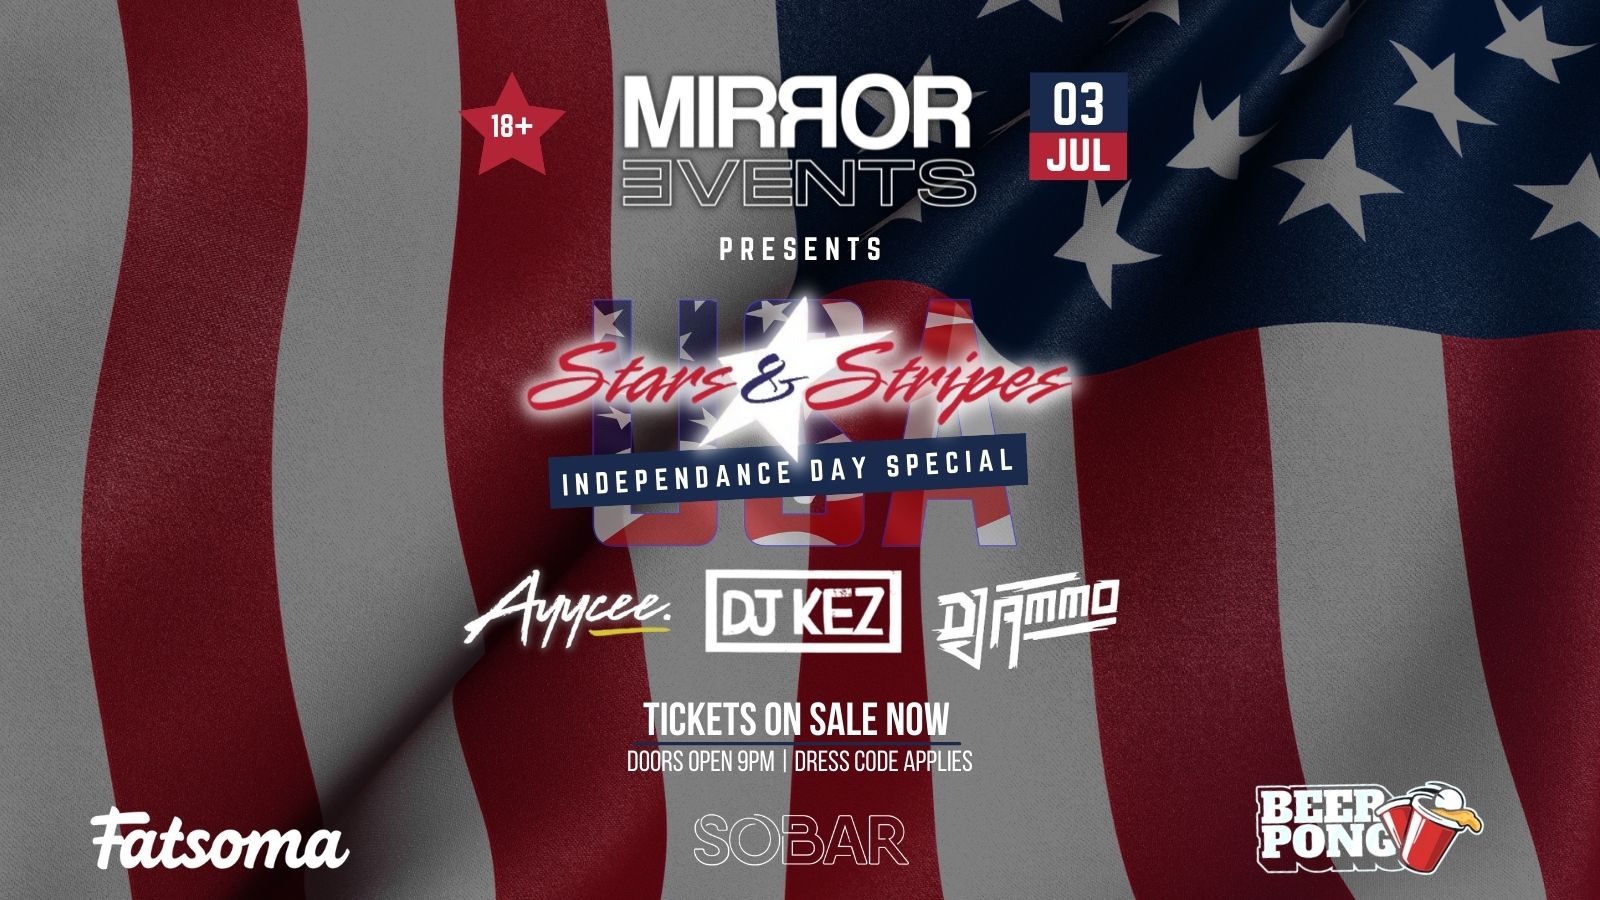 MIRROR EVENT’S PRESENT STARS & STRIPES | INDEPENDENCE DAY SPECIAL